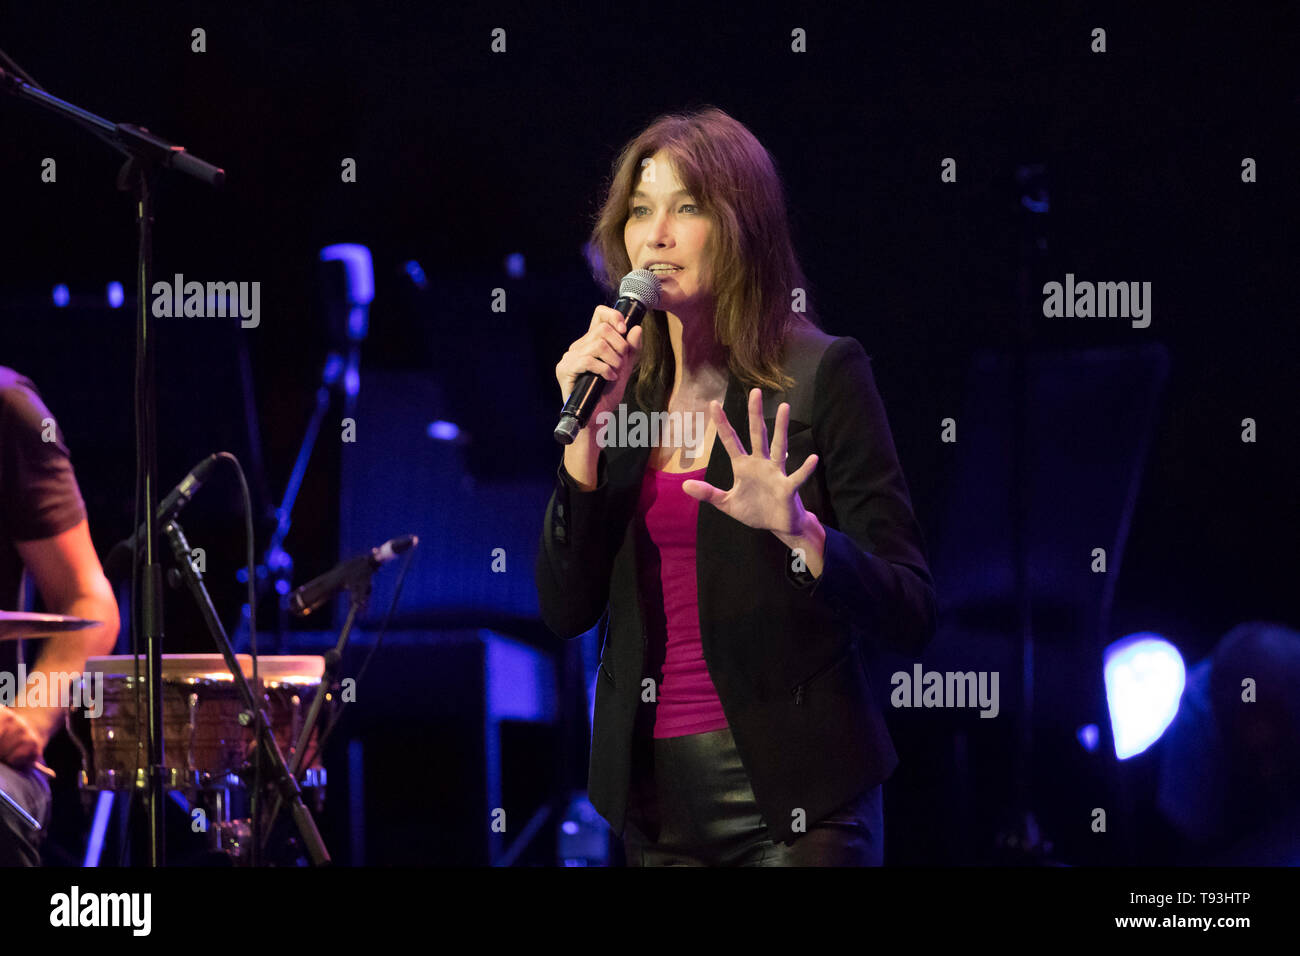 Singer Carla Bruni on stage during concert at the Jazz Festival of Juan on 2018/07/17 *** Local Caption *** Stock Photo